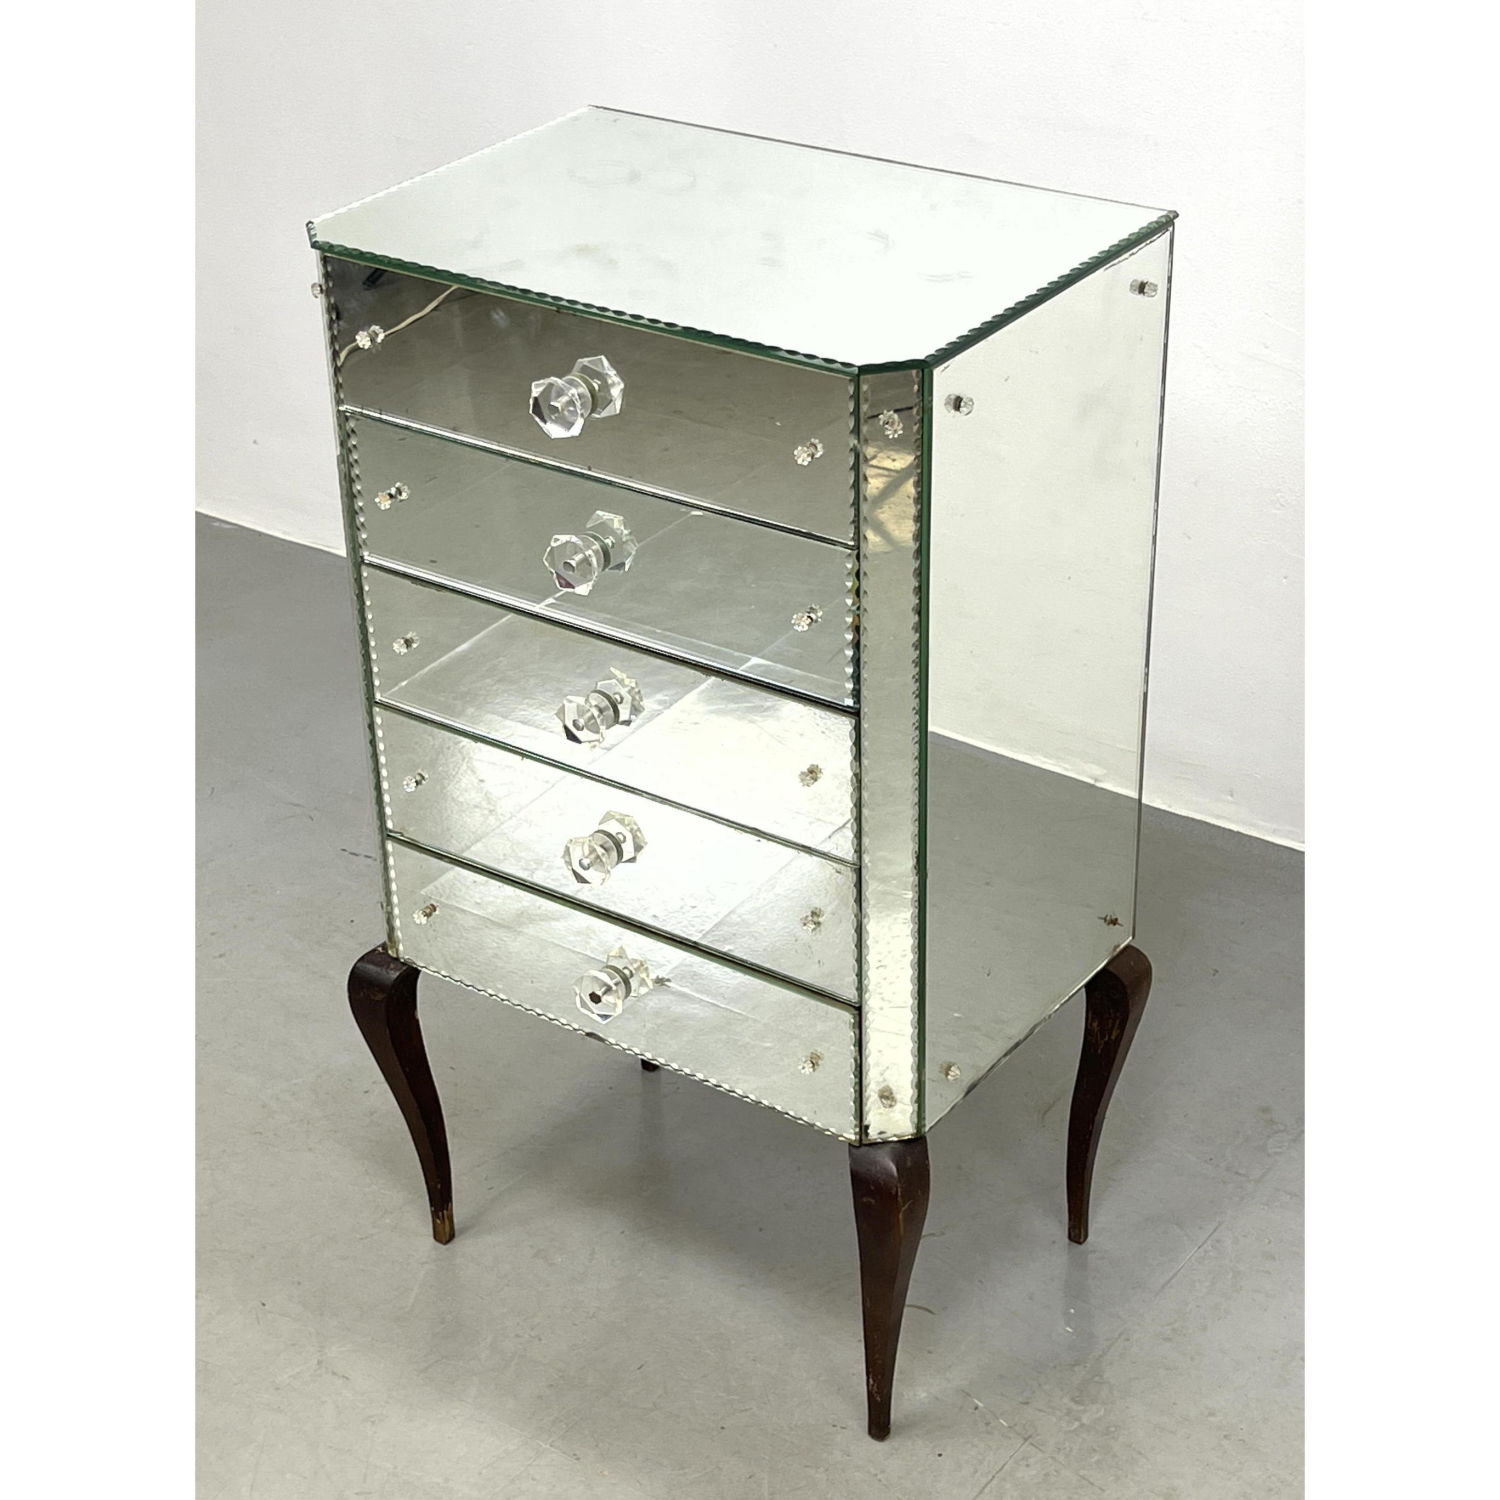 5 Drawer Mirrored Jewelry Side